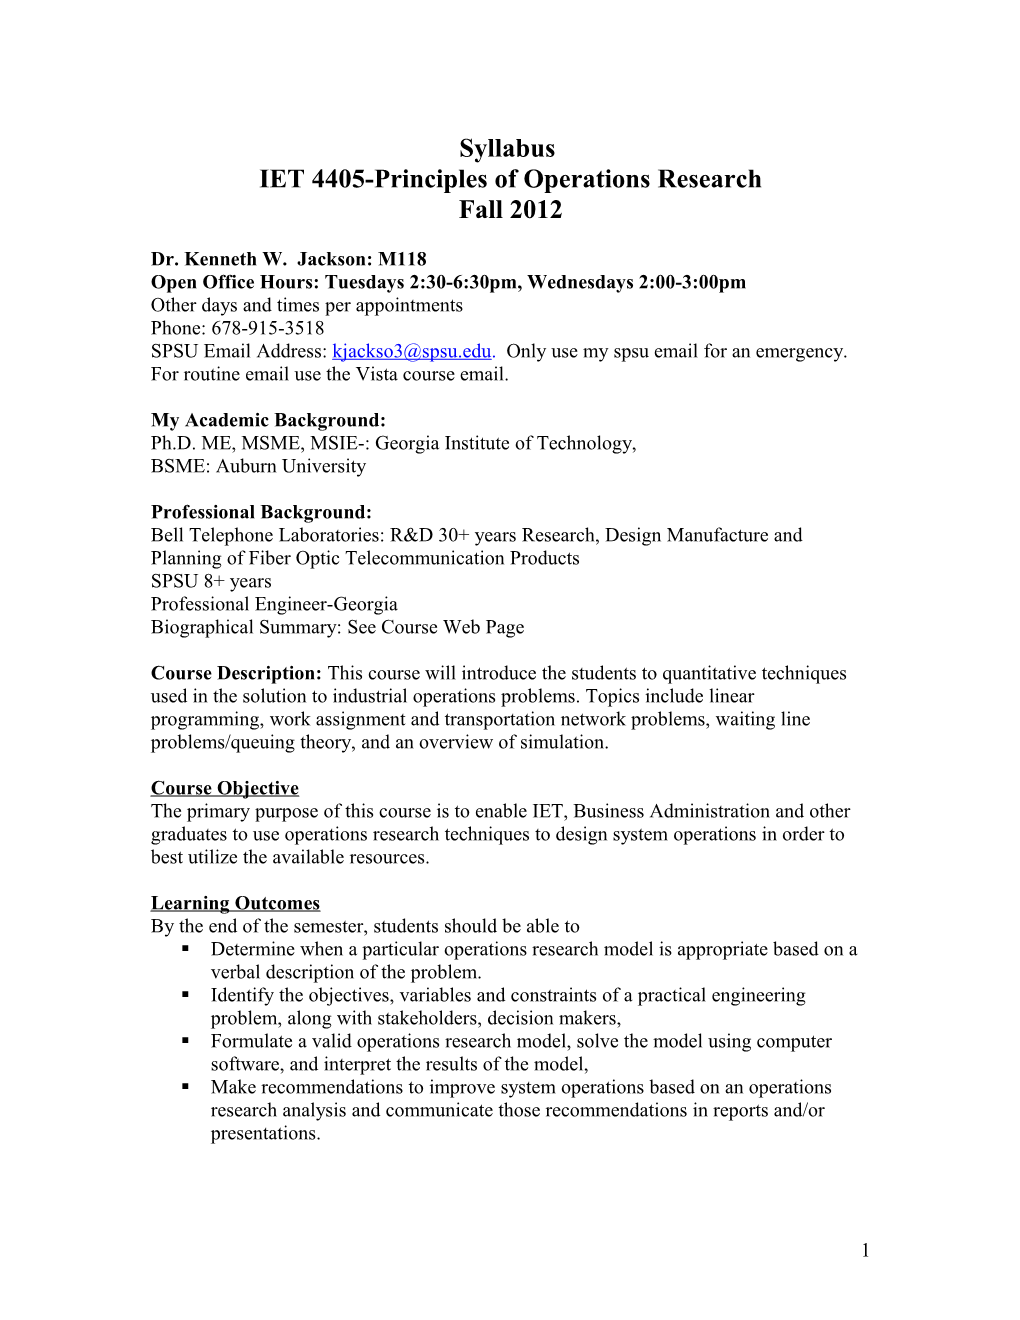 IET 4405-Principles of Operations Research